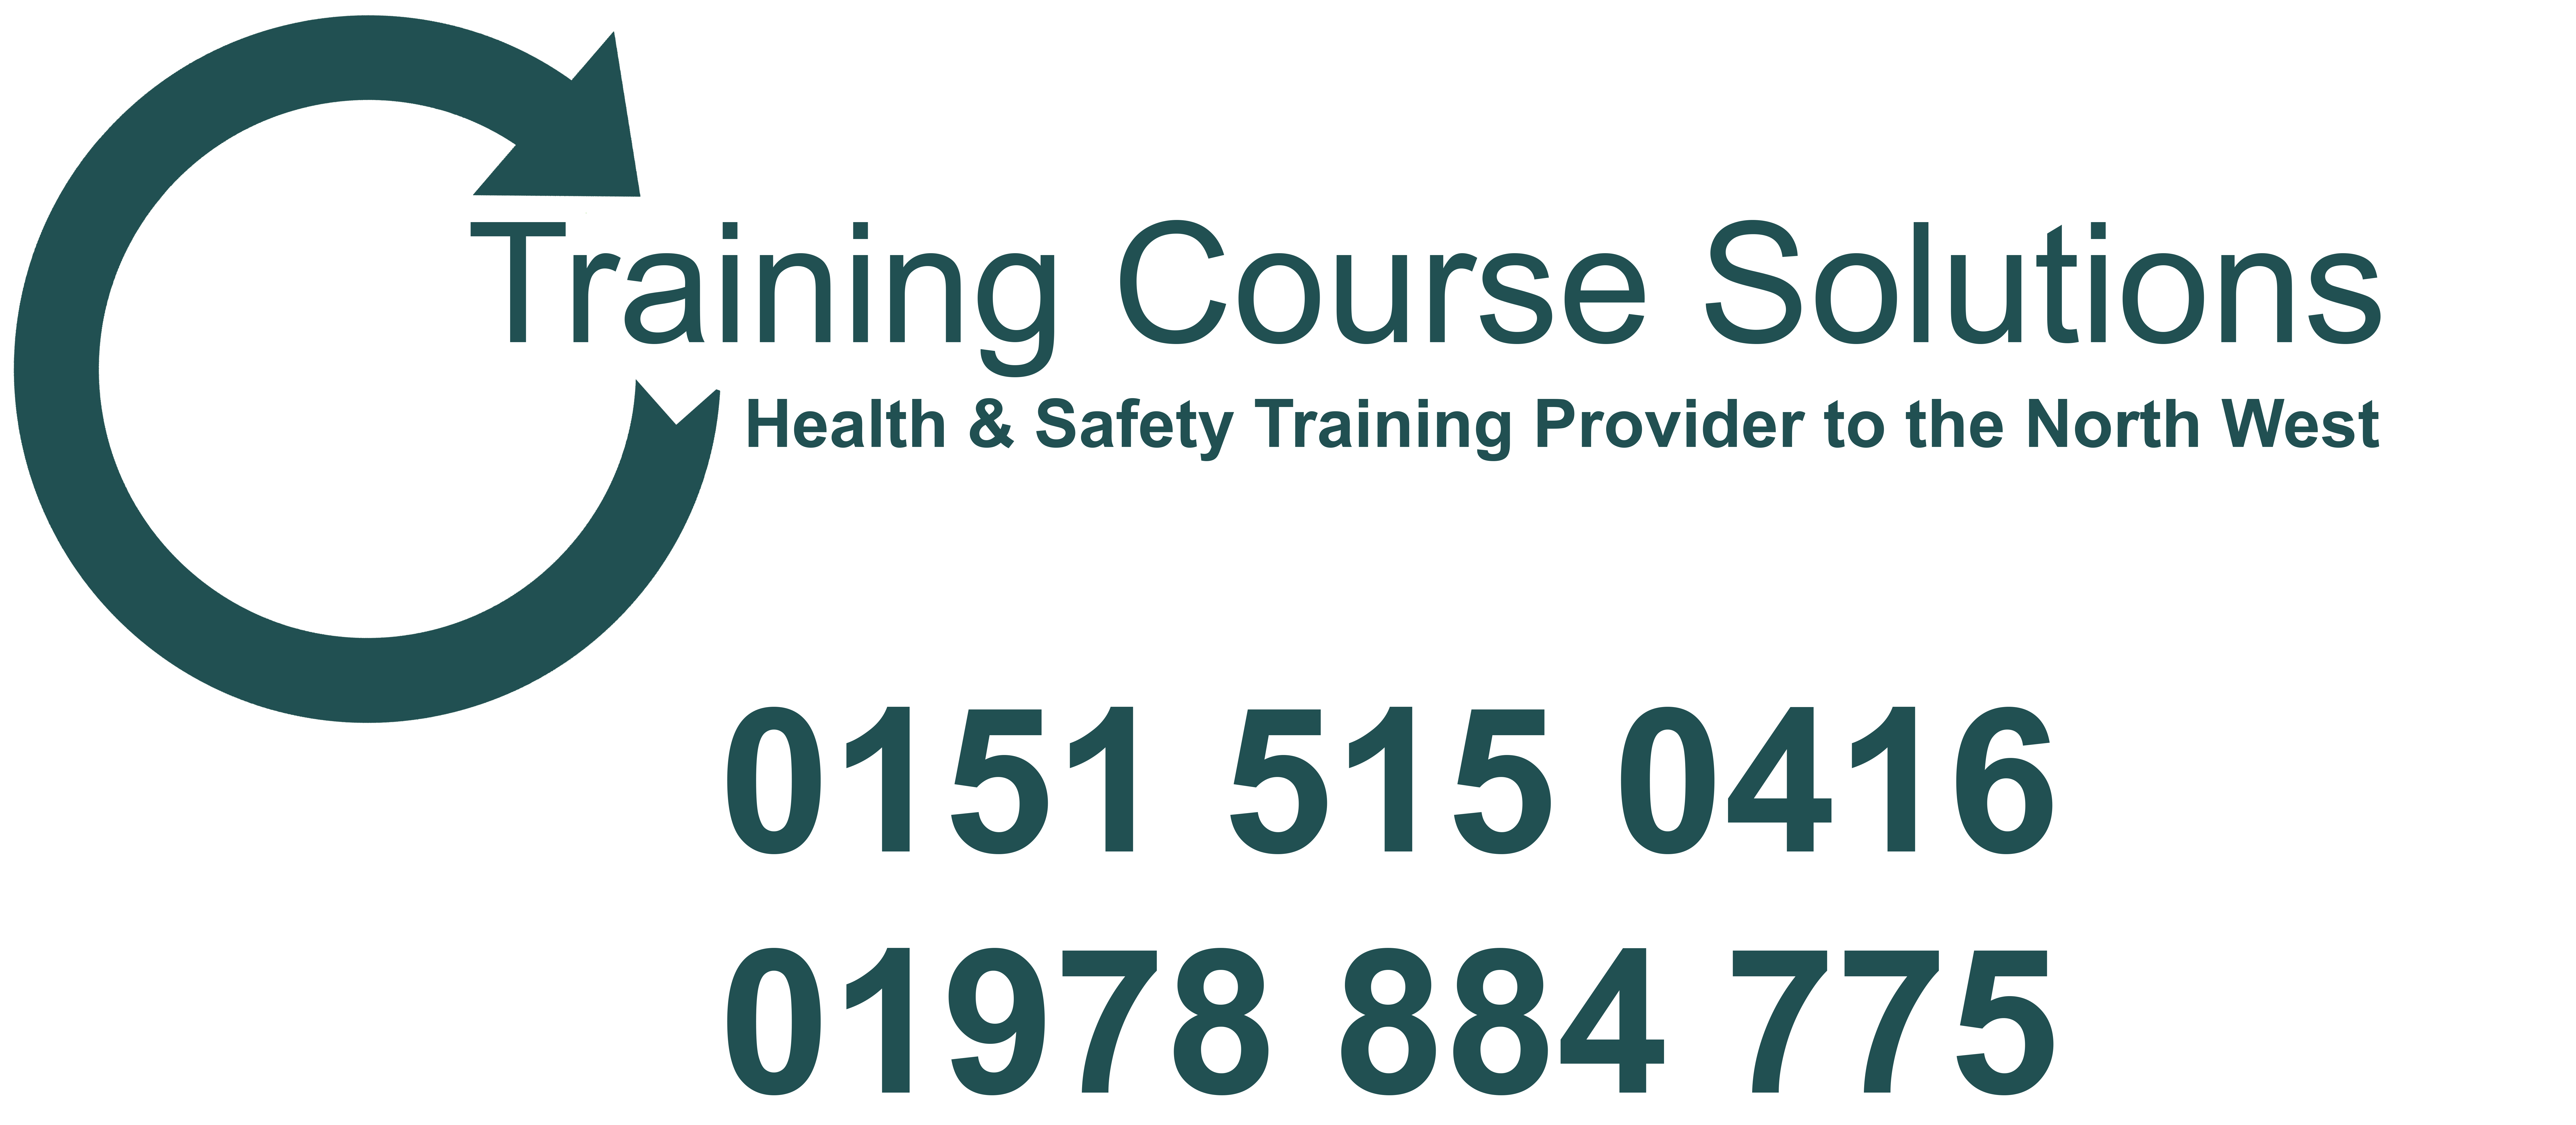 Training Course Solutions